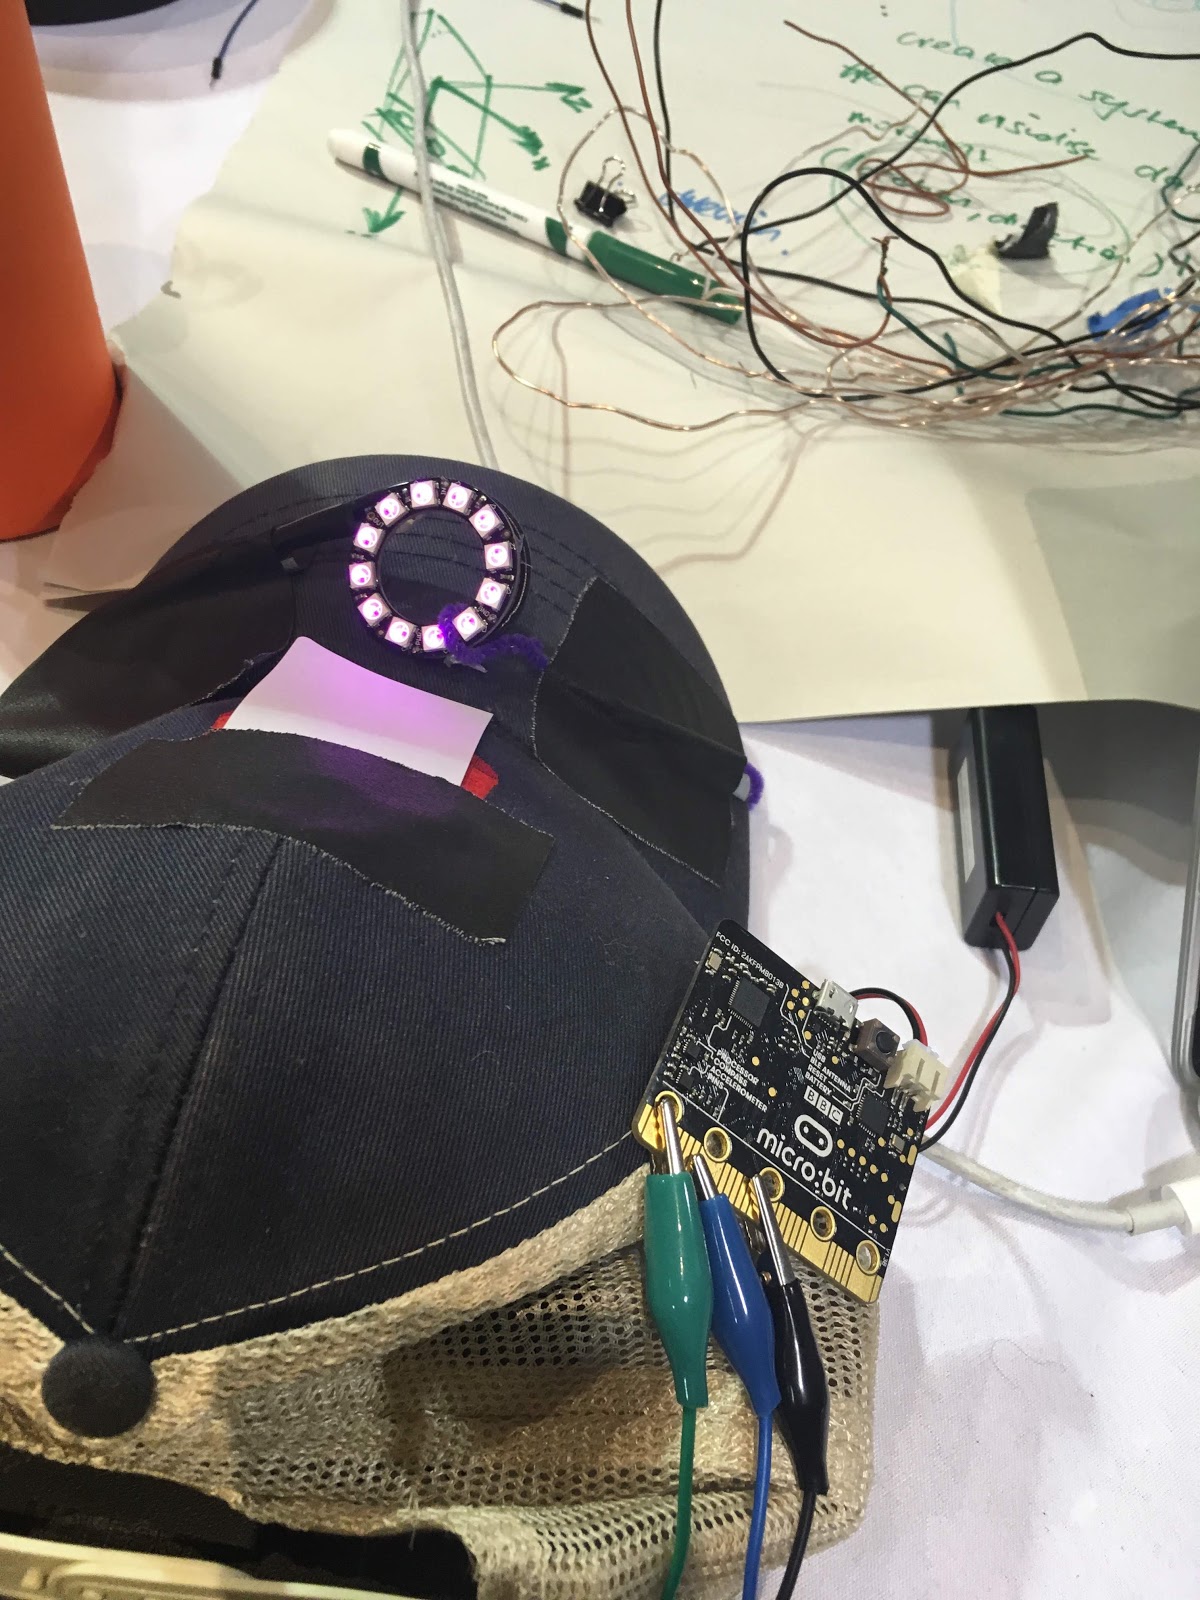 light up project with micro:bit